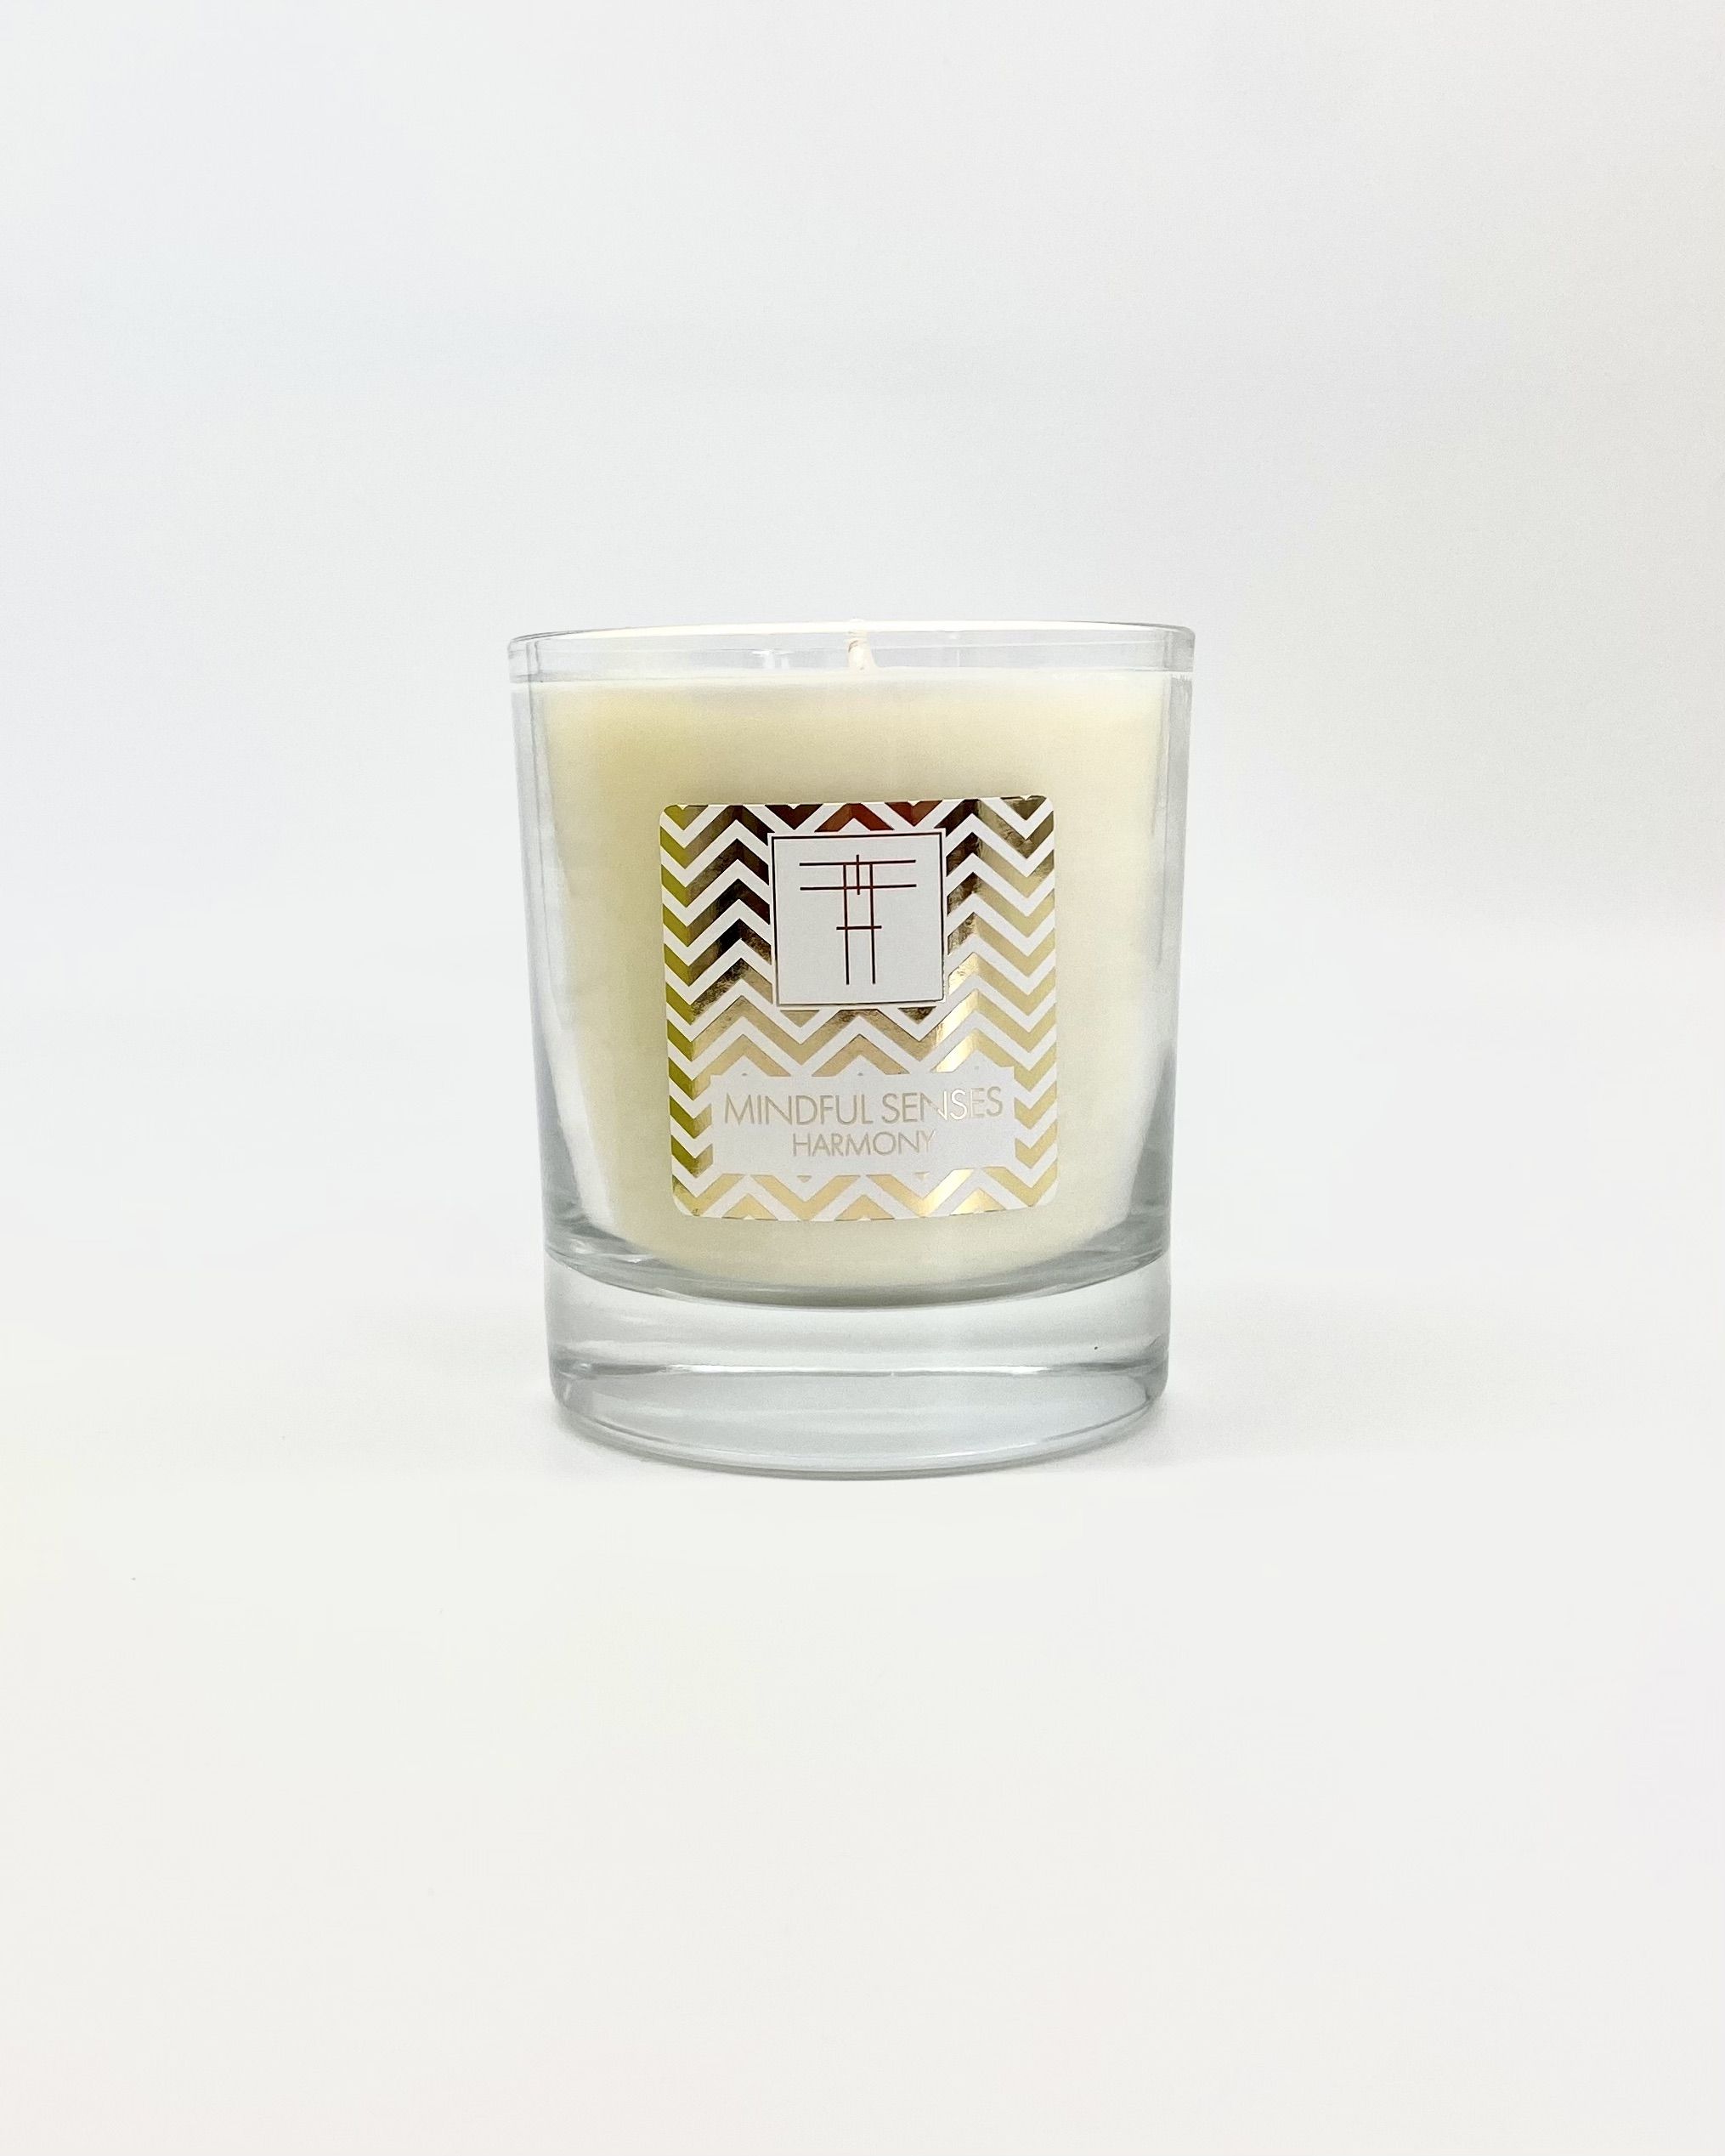 Created to create a calm and restorative enviroment, Mindful senses Candles are emotive triggersof colour, scent and mood. Find harmonious balance and calm amidst the turmoil with this Harmony Candle. Created to open your mind and restore your resilience, this mellow and refreshing candle is scentedwith notes of mandarin, basil, orange, spearmit, tea, patchouli and cedarwood.

100% Natural  organic Soy wax.

100% British designed,cratfed and manufactured.

Size 300cl 45+ Hour burn time.